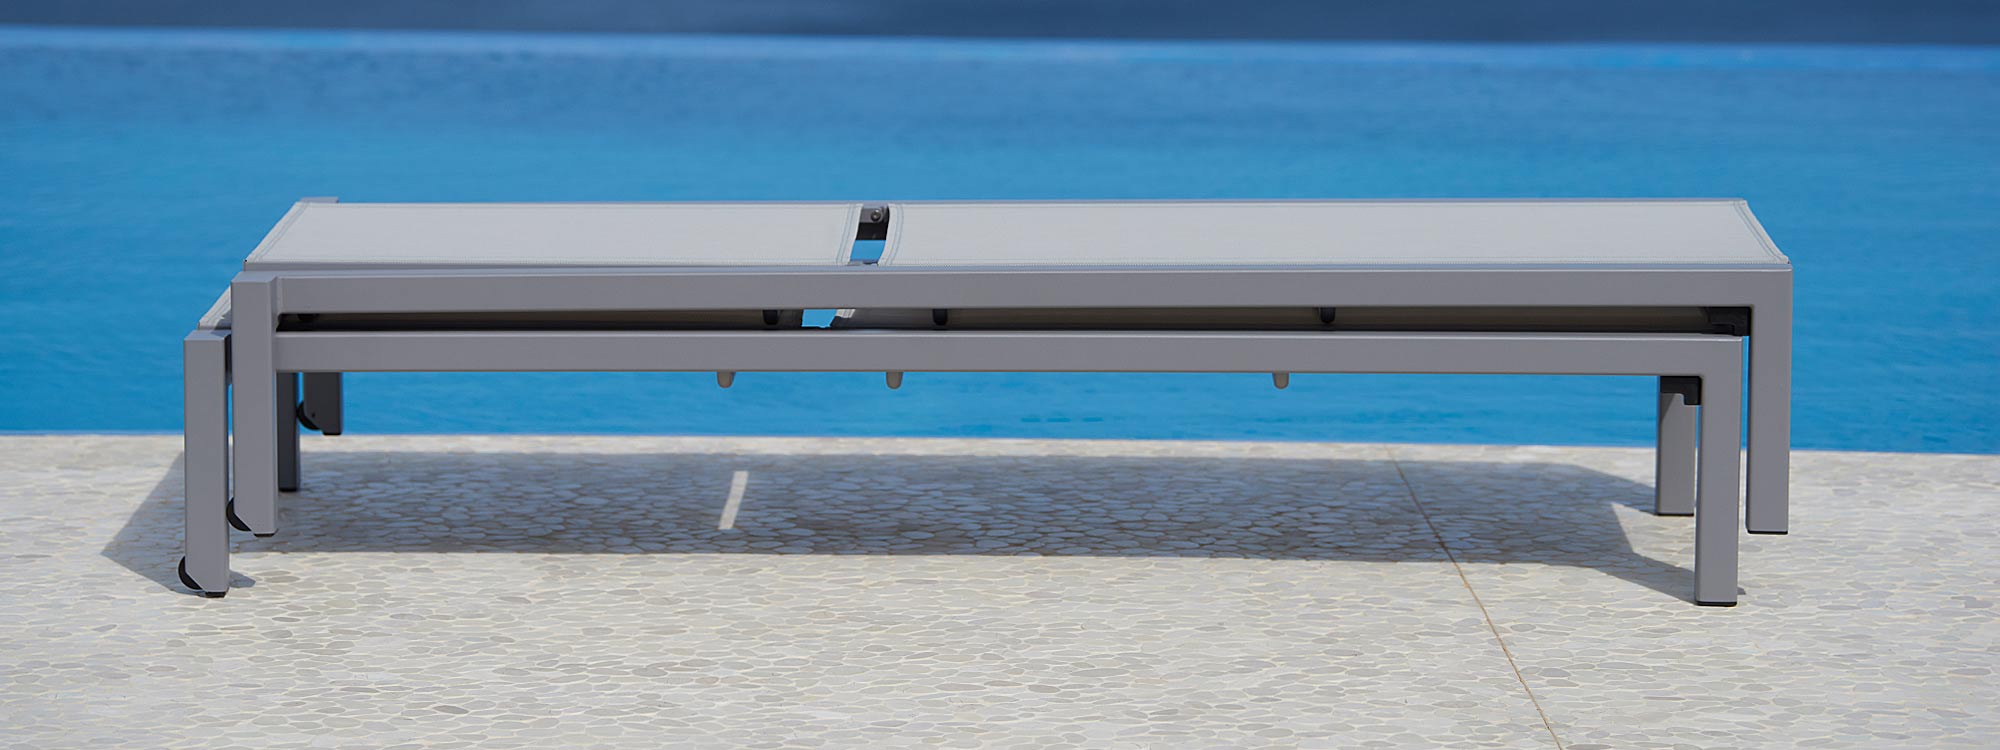 Relax aluminium sun lounger is a stackable, modern sunbed in high quality garden furniture by Cane-line outdoor furniture company, Denmark.